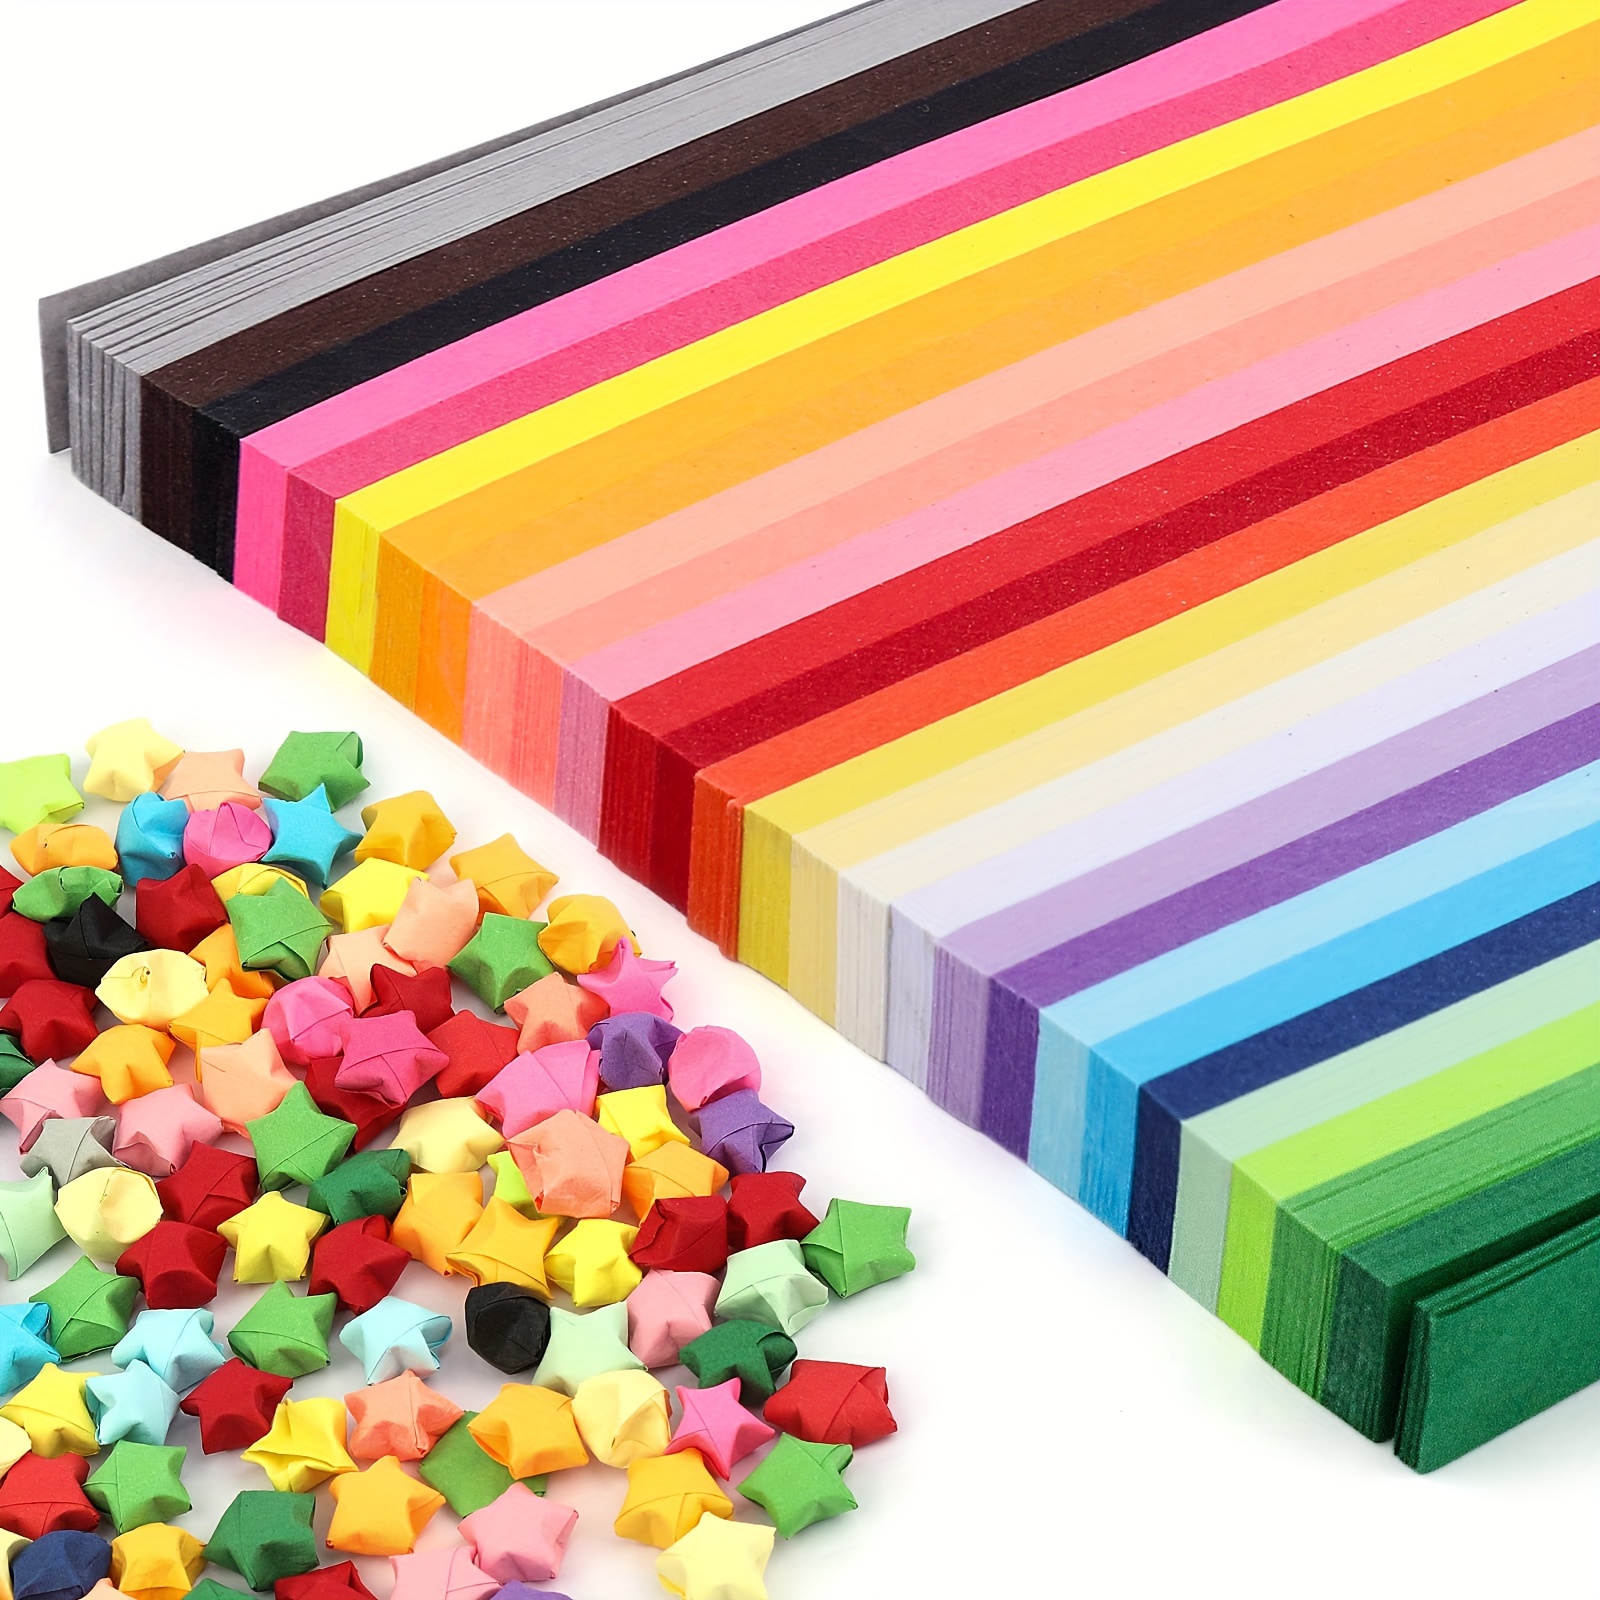 2700 Sheets Origami Stars Papers,Aierliusa Origami Star Paper Strip  Package, Origami Paper Stars, 27 Colors, 2700 Stripes 